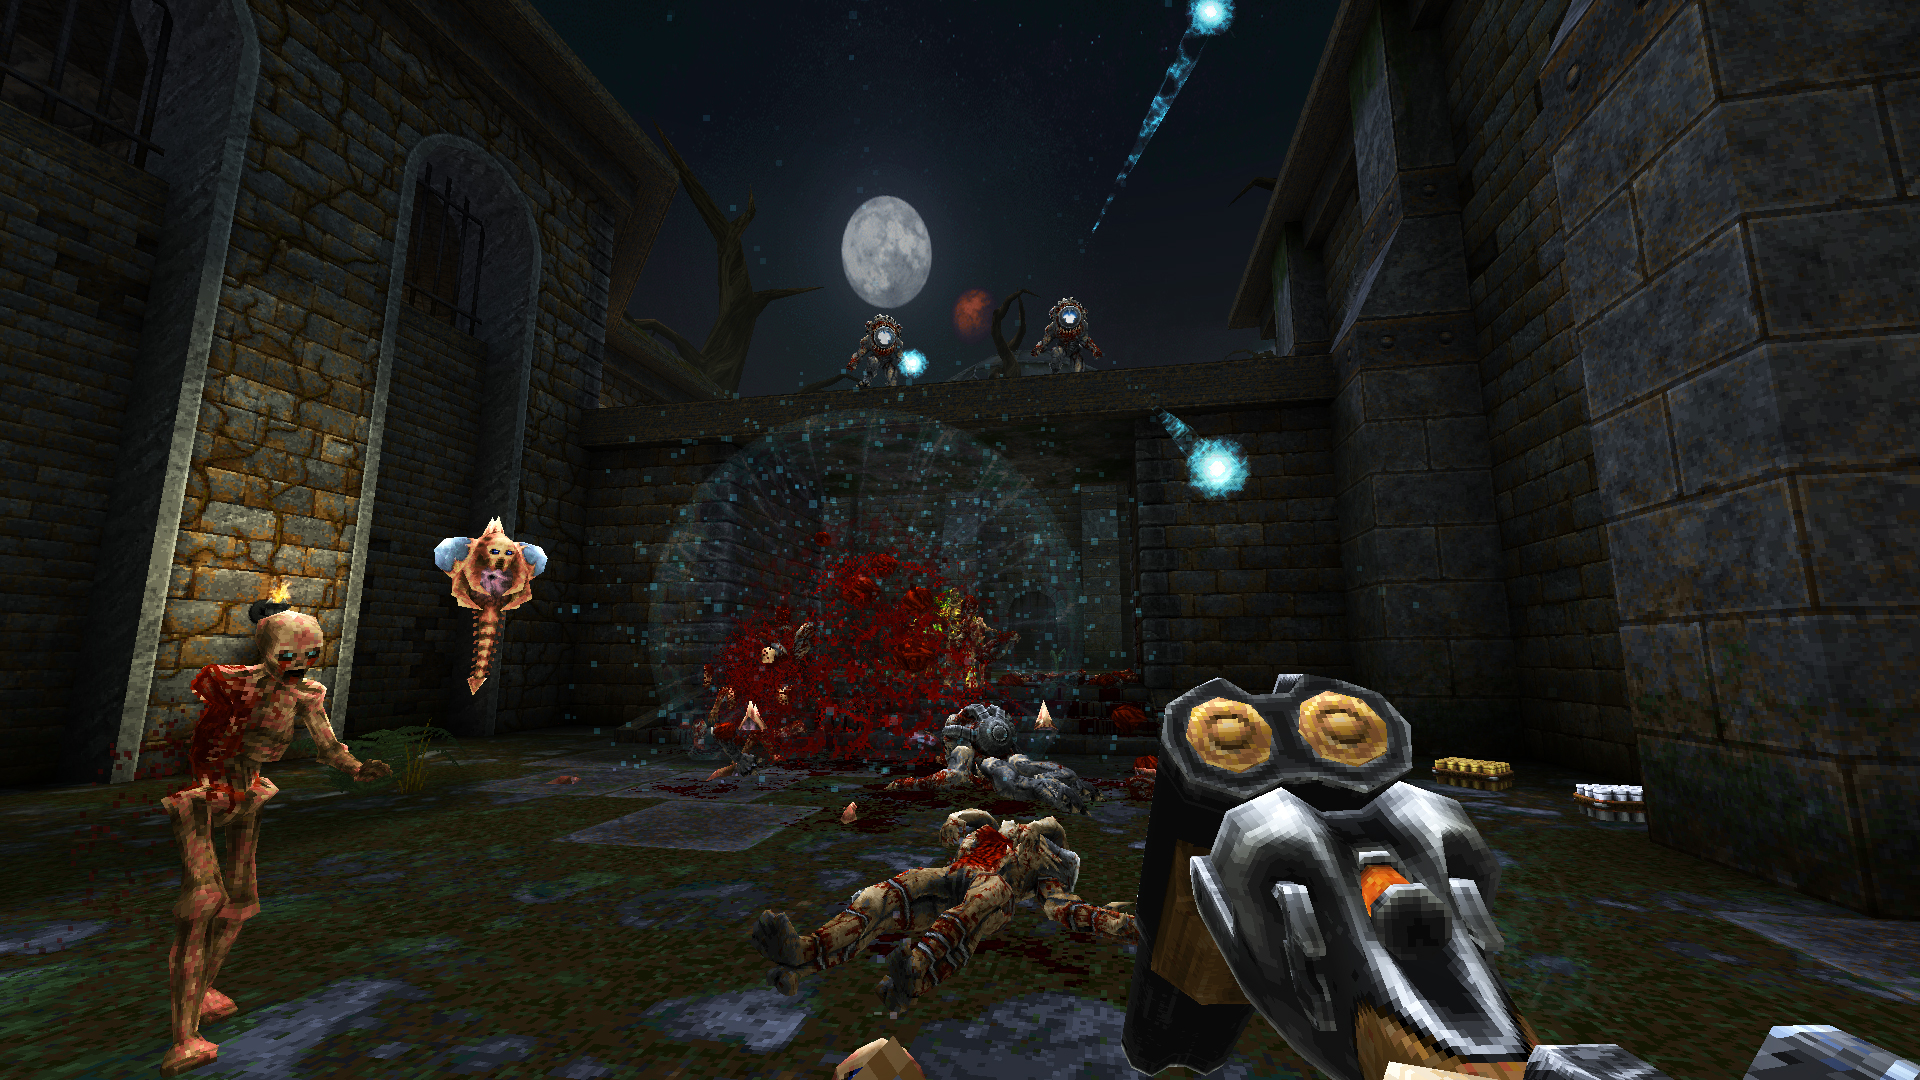 View the Mod DB WRATH: Aeon of Ruin image wrath content update1 001.